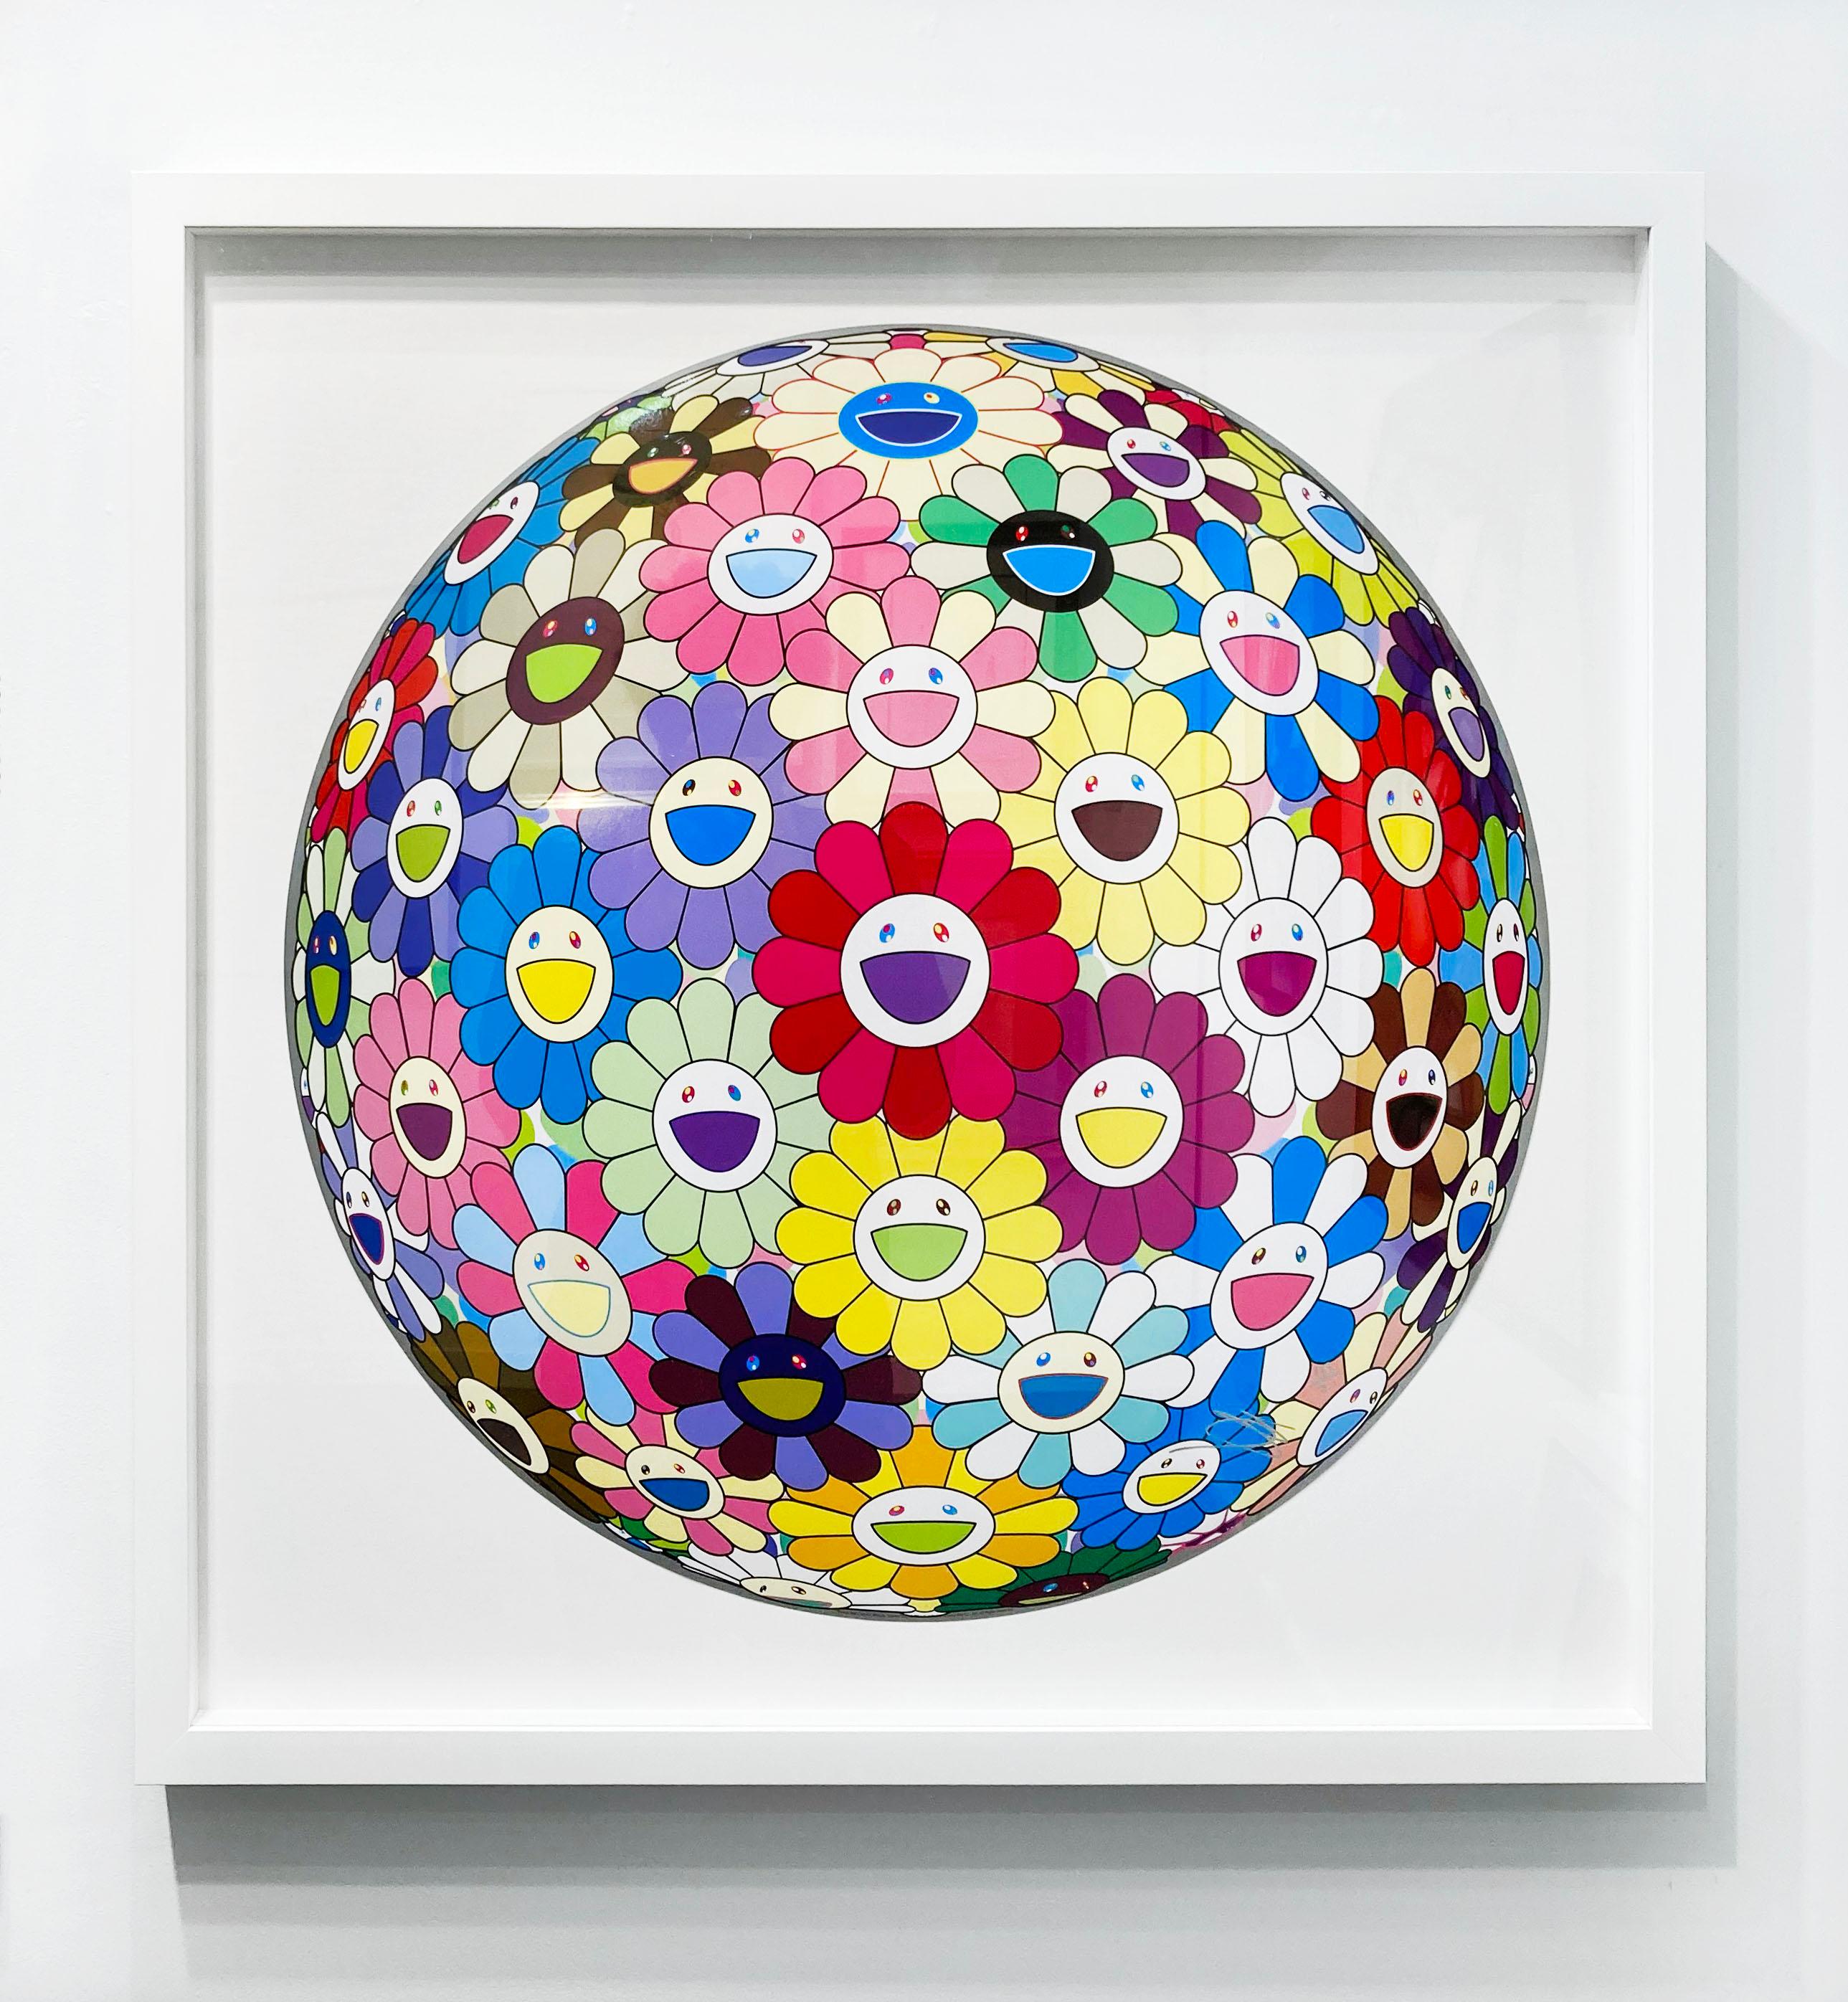 Flowerball: Colorful, Miracle, Sparkle - Contemporary Print by Takashi Murakami